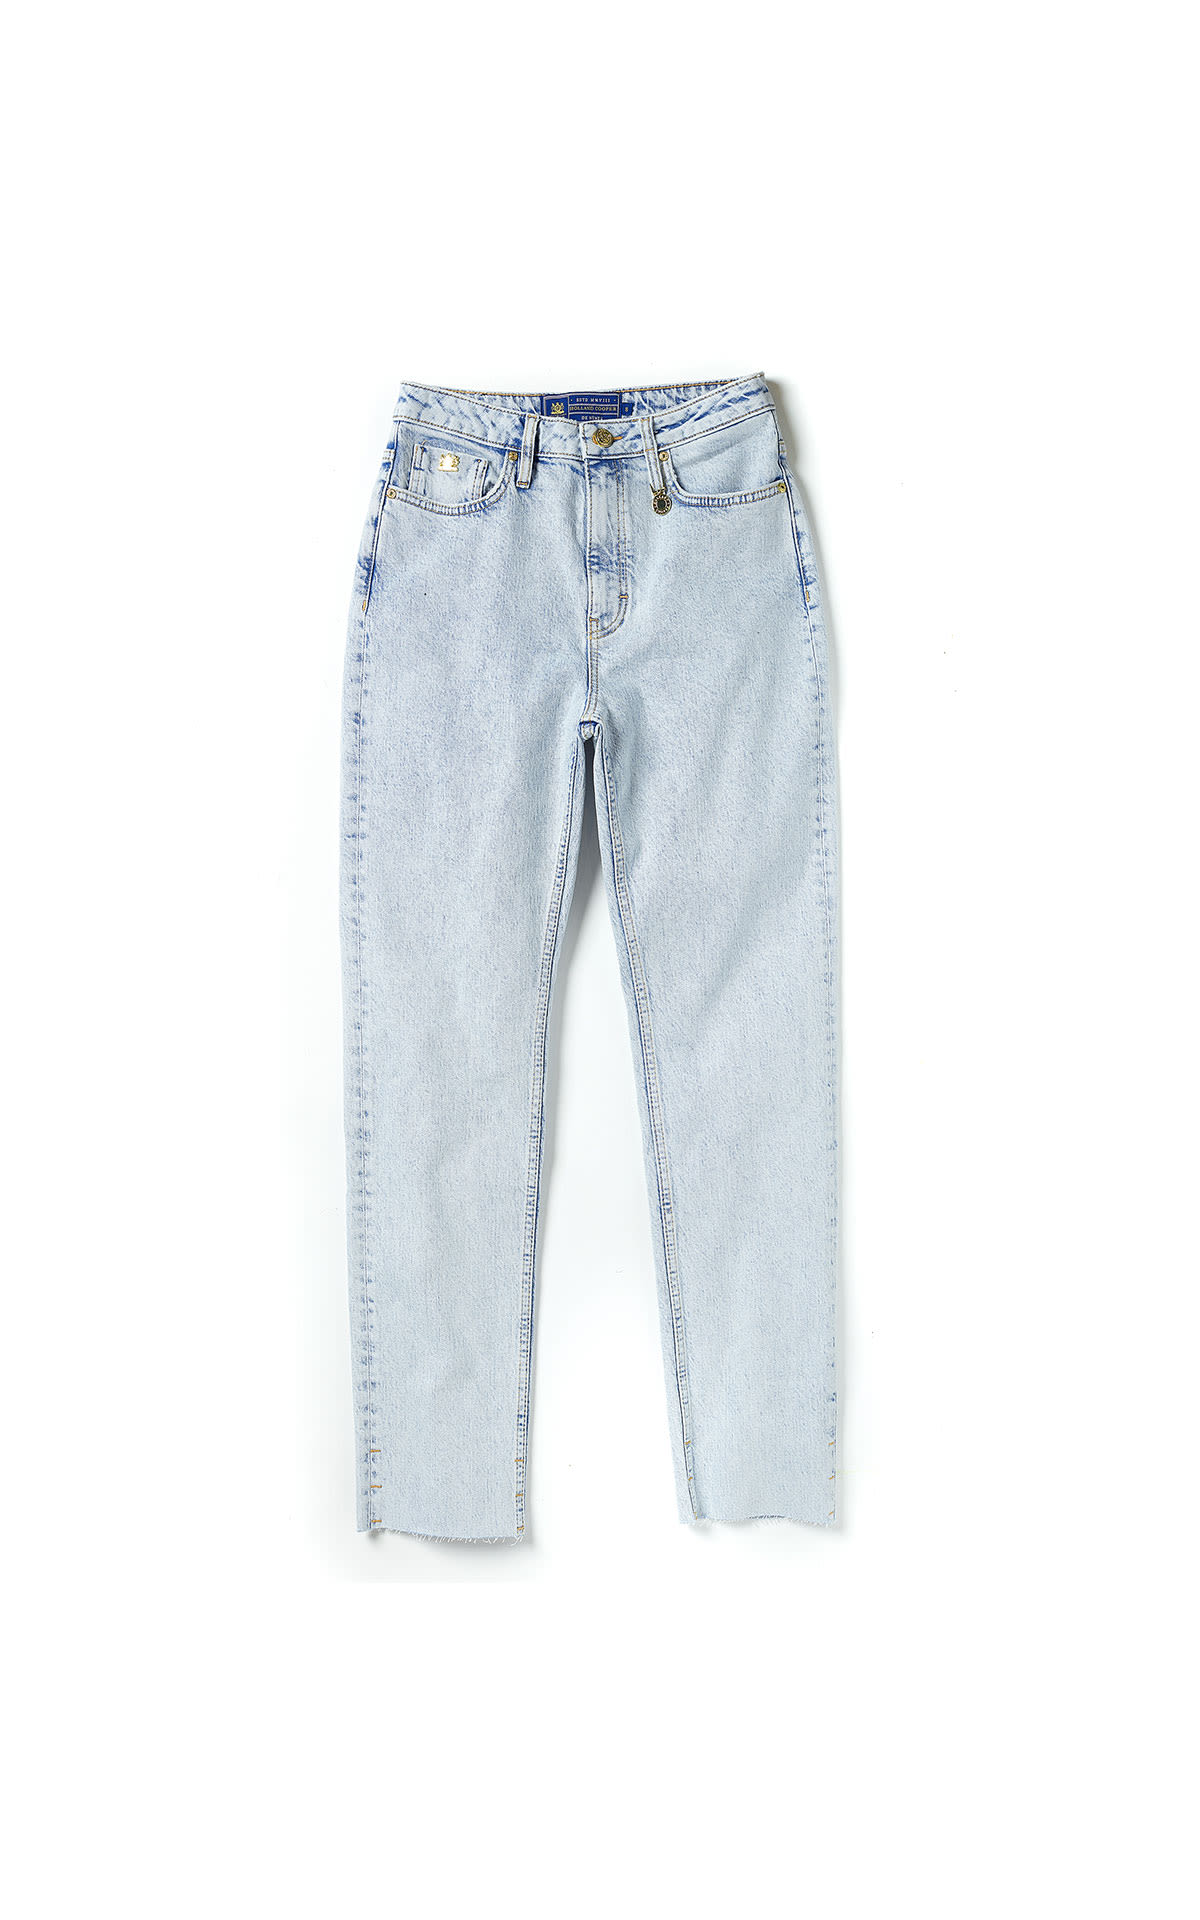 Holland Cooper High rise slim jean from Bicester Village